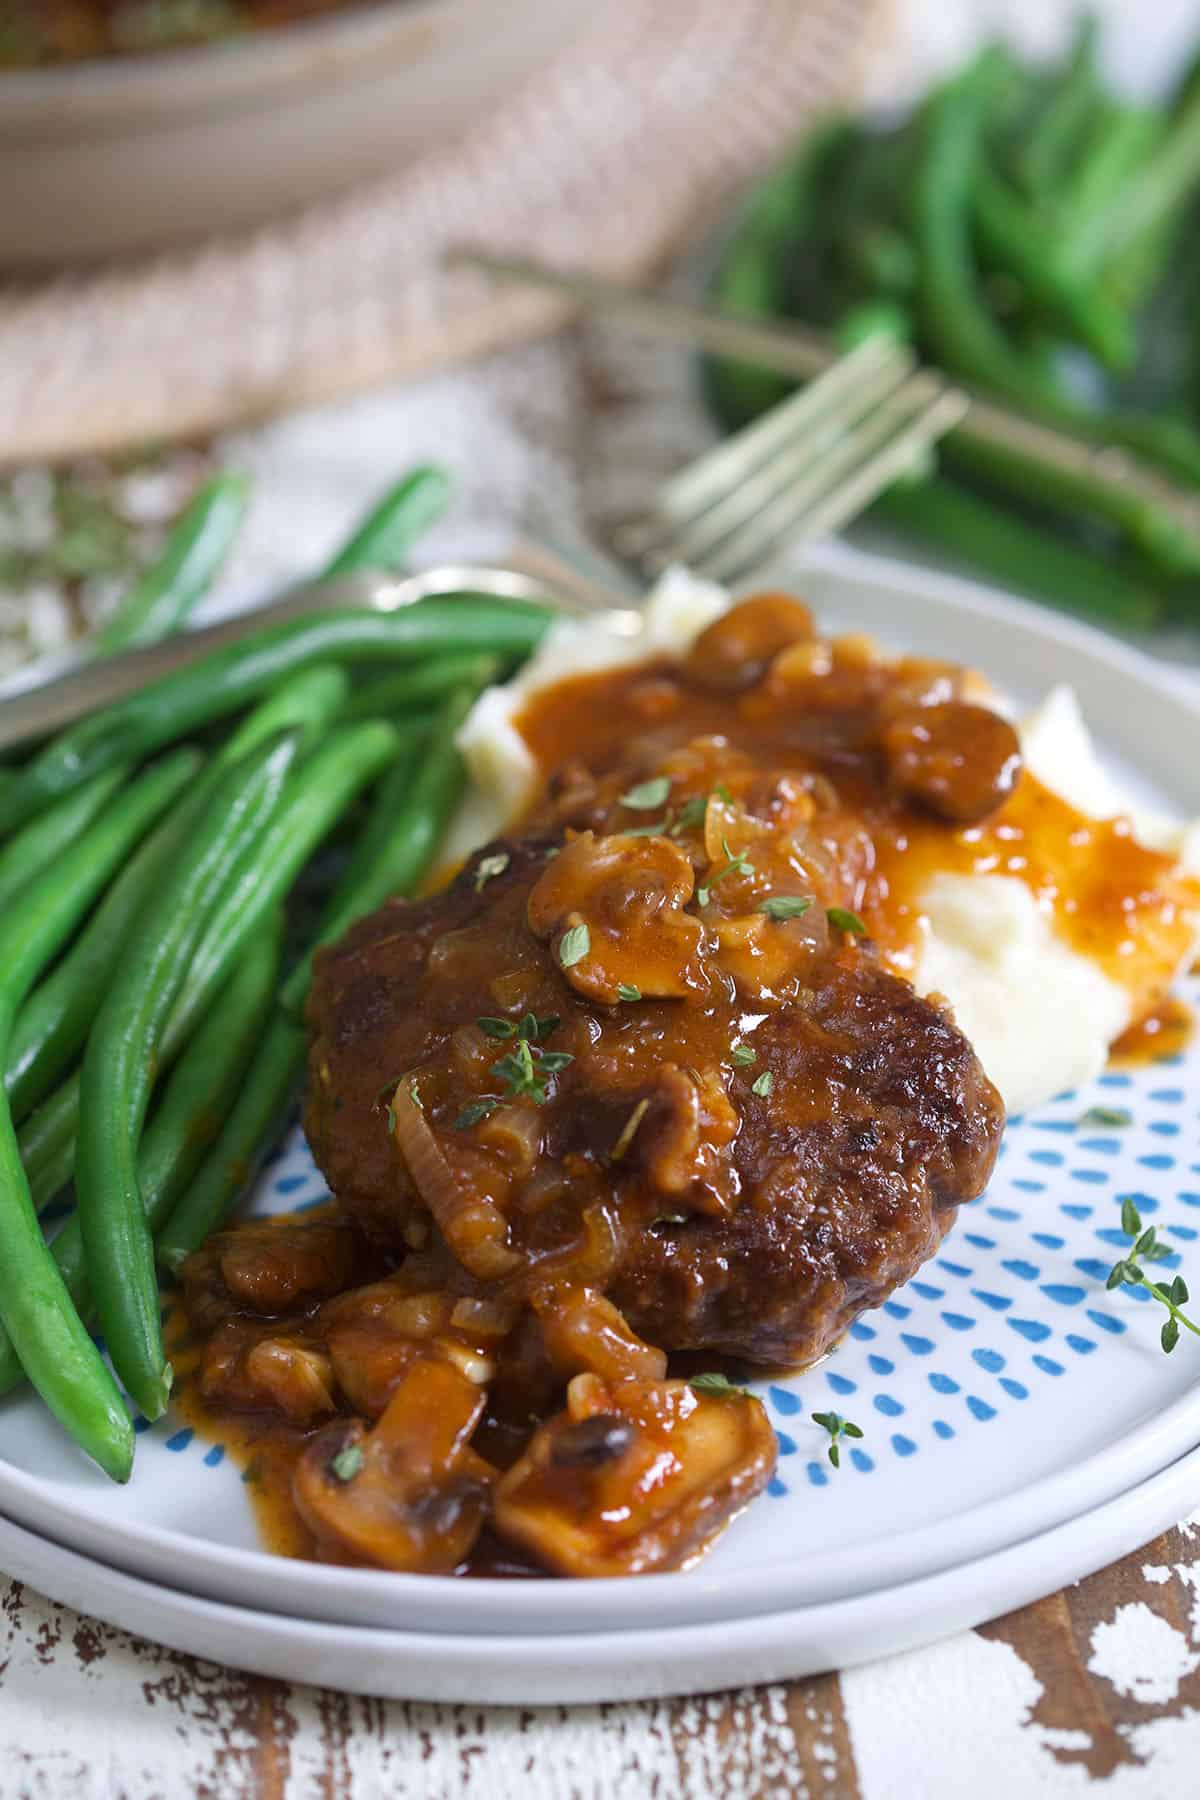 Hamburger steak is plated with green beans and mashed potatoes.